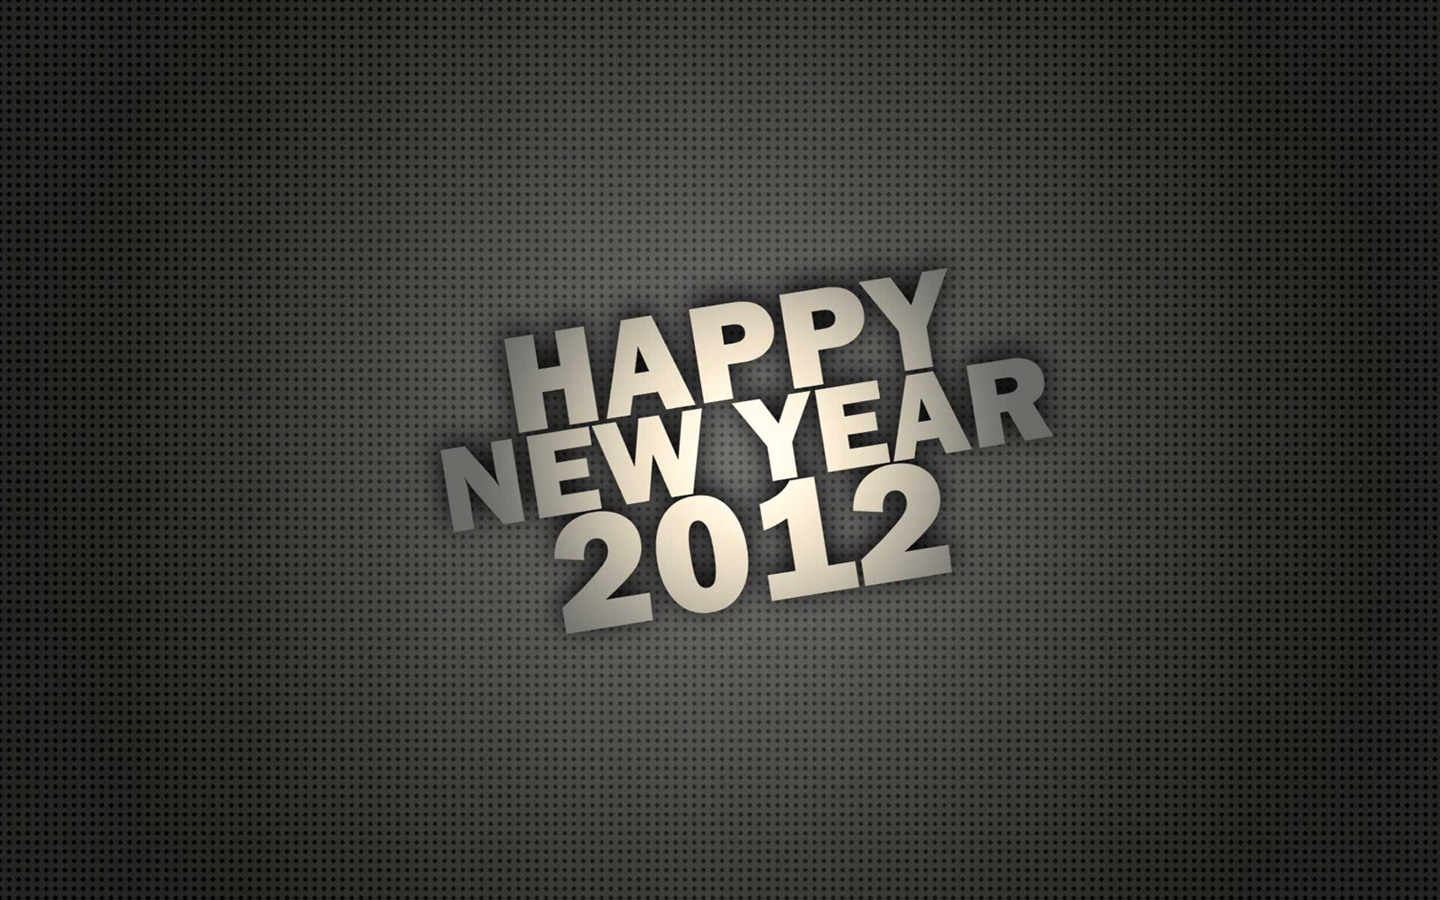 2012 New Year wallpapers (2) #4 - 1440x900